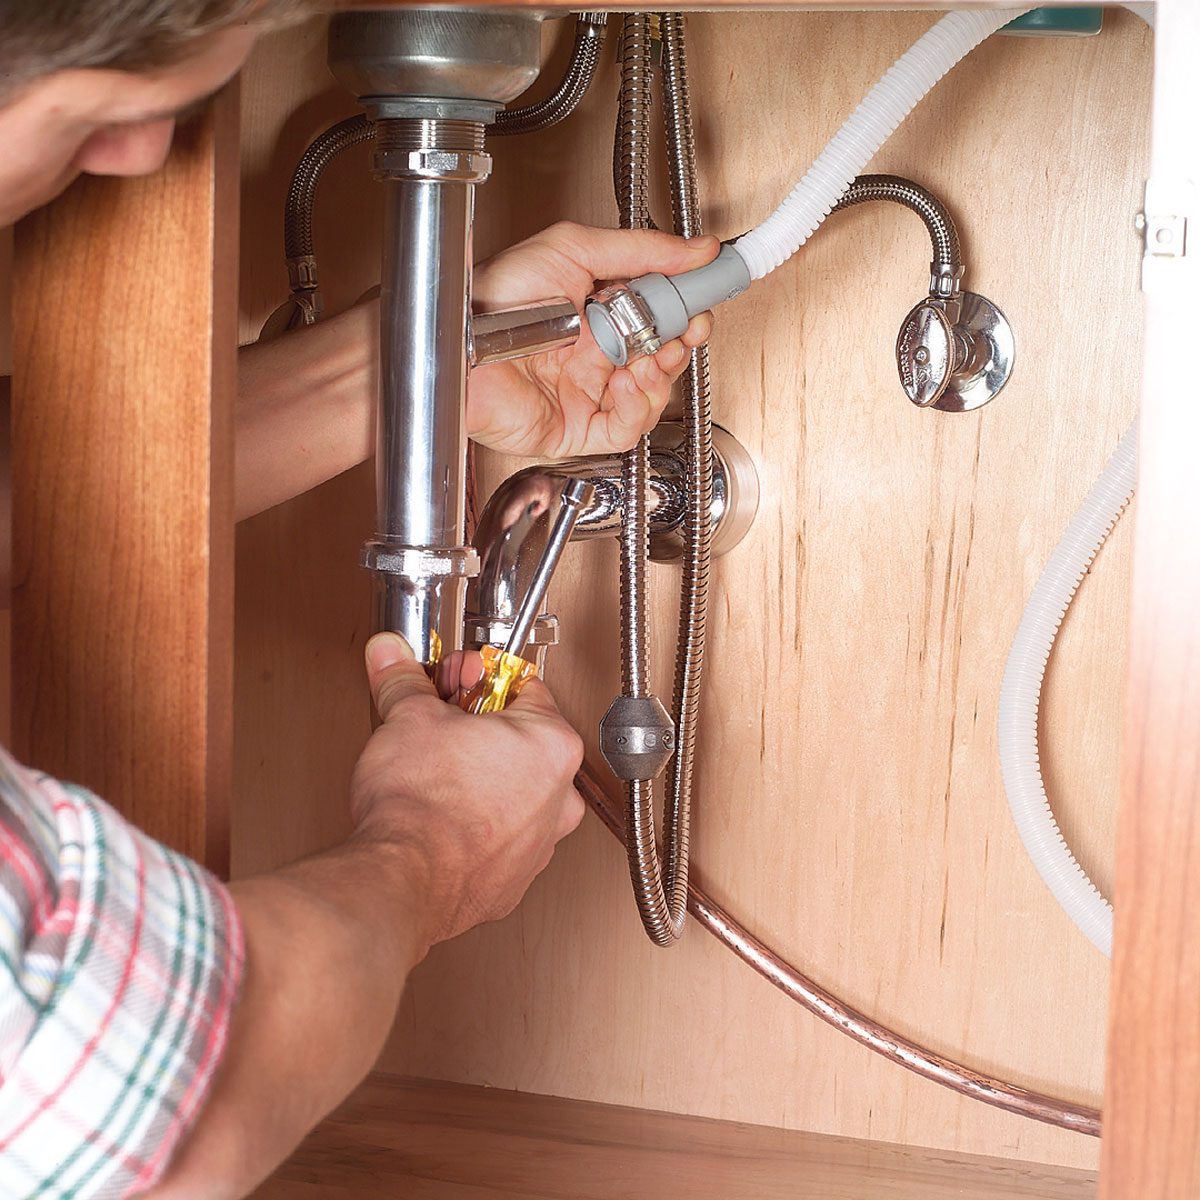 How To Replace A Dishwasher attach the drain line